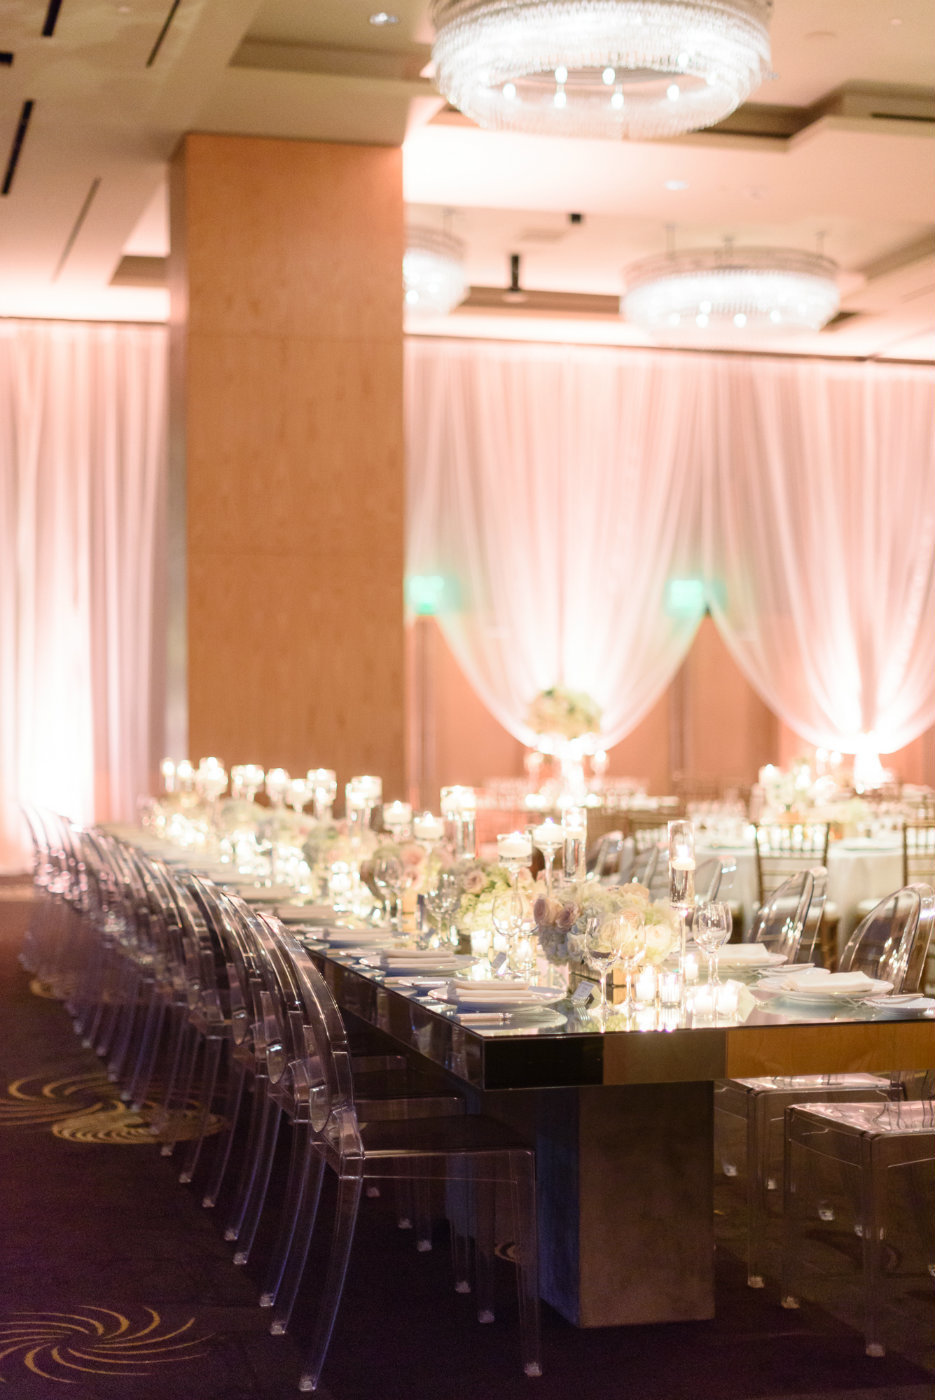 Mirrored tables lined with candles and white flowers and clear lucite chairs are perfect for a winter wedding.